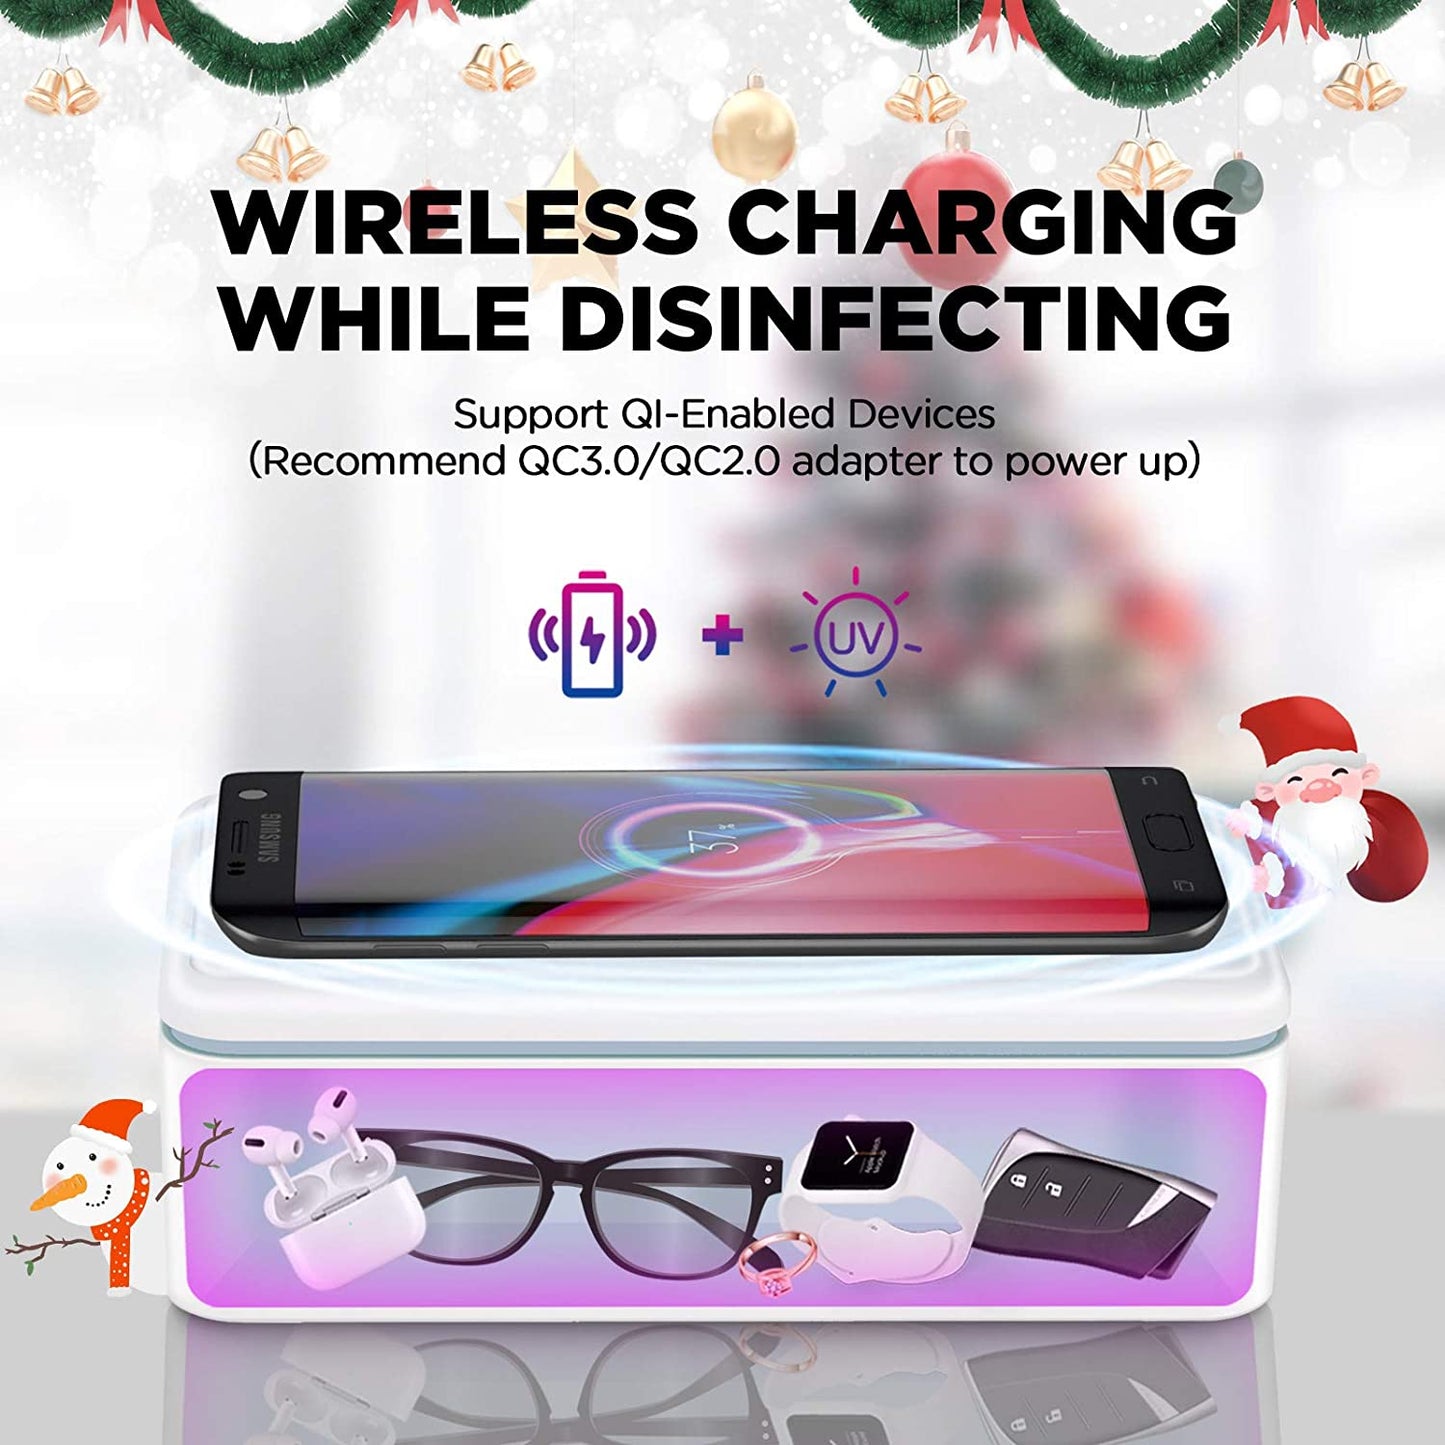 UV Light Sanitizer Box Portable Phone UVC Light Sanitizer with Extra Rack Wireless Charging for Smart Phone Deep UV Sterilizing Box for Cell Phone Watches, Jewelry, Glasses